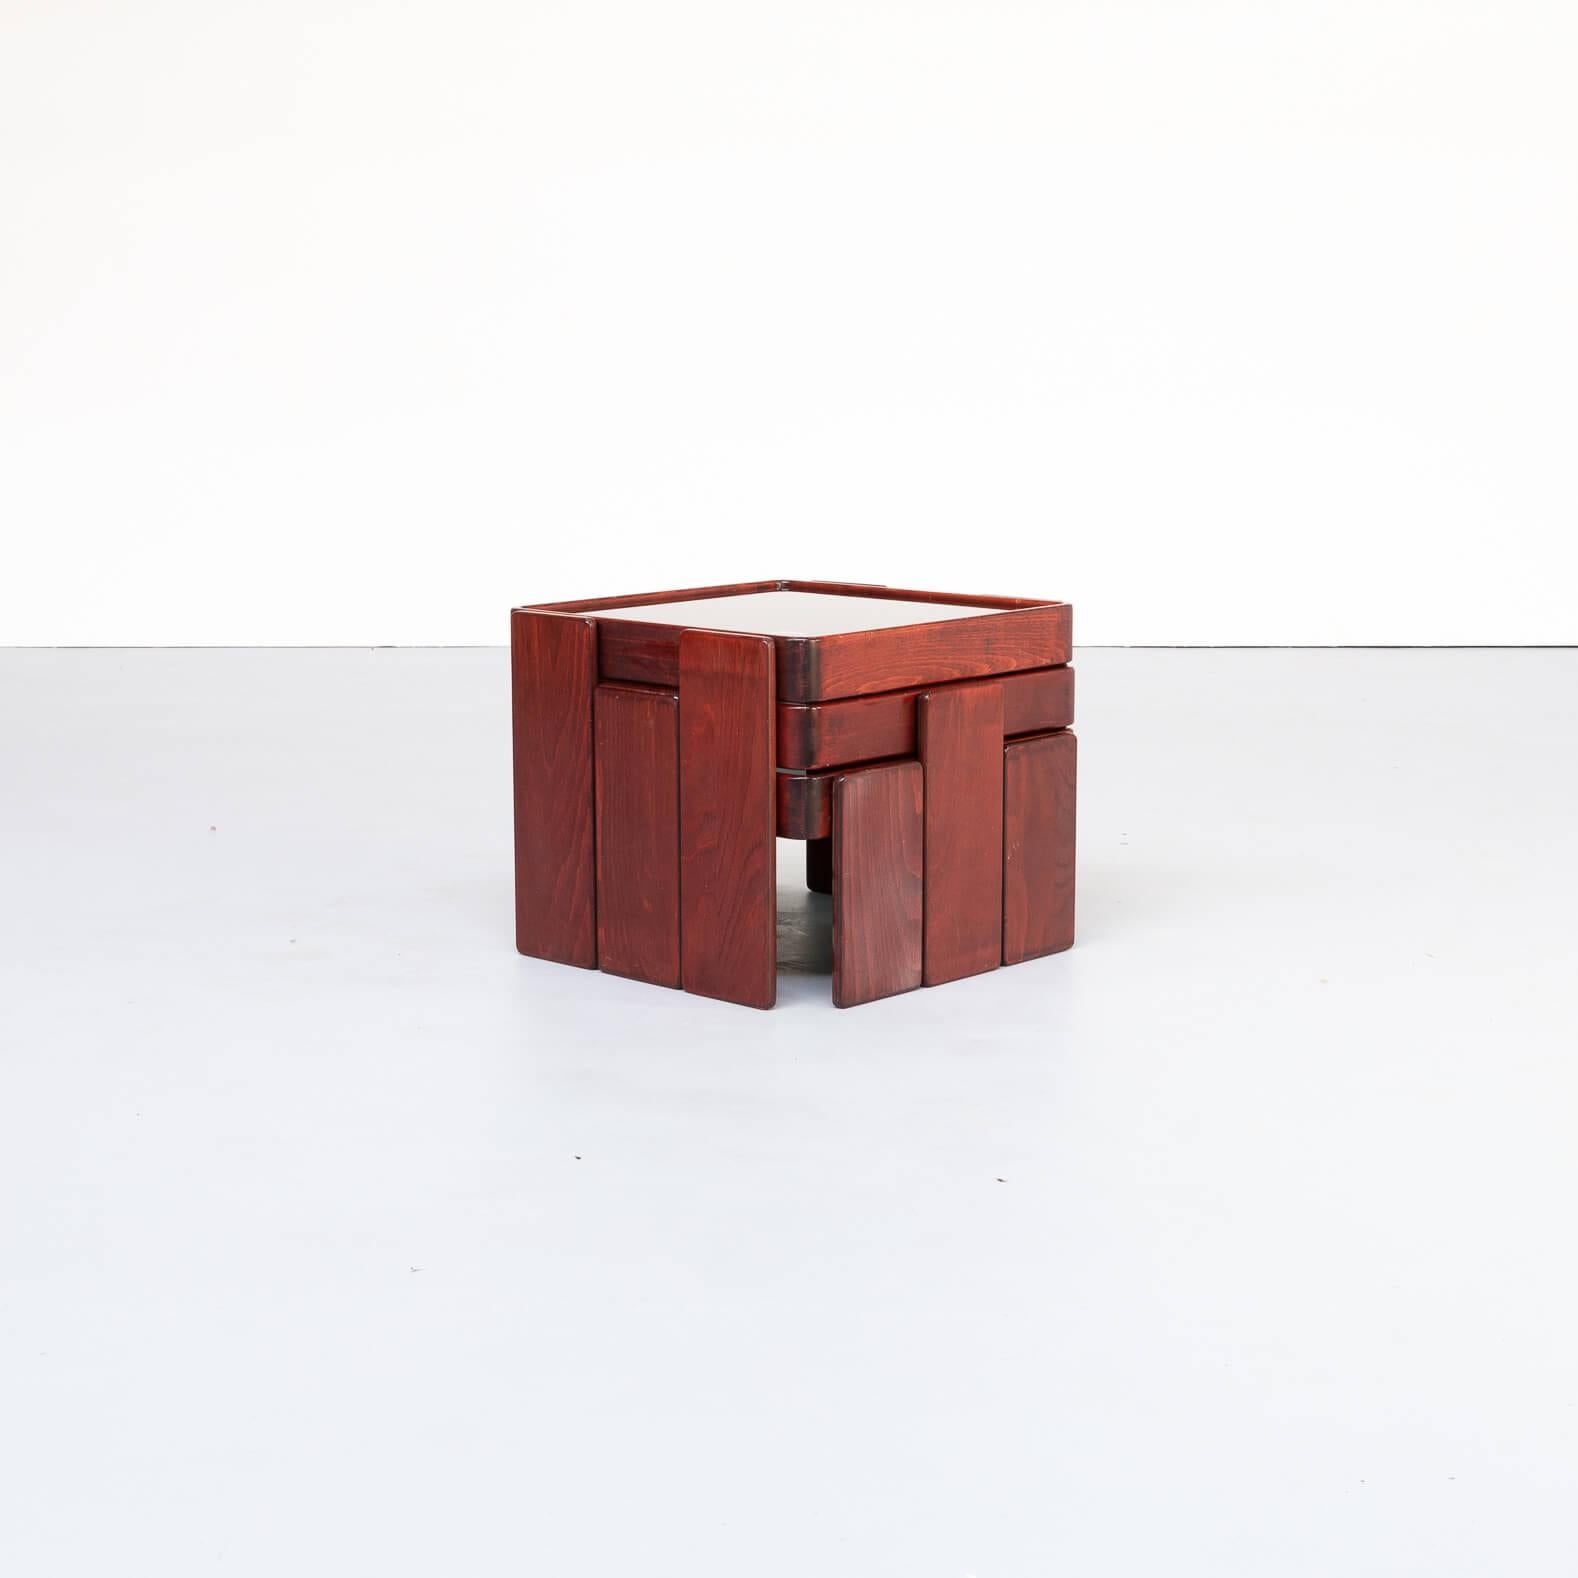 The nesting tables designed by Gianfranco Frattini have been designed by him in the 1960s, They are beautifully stackable to be used aswel as sidetable aswel as nesting tables. Item in good condition consistent with age and use.